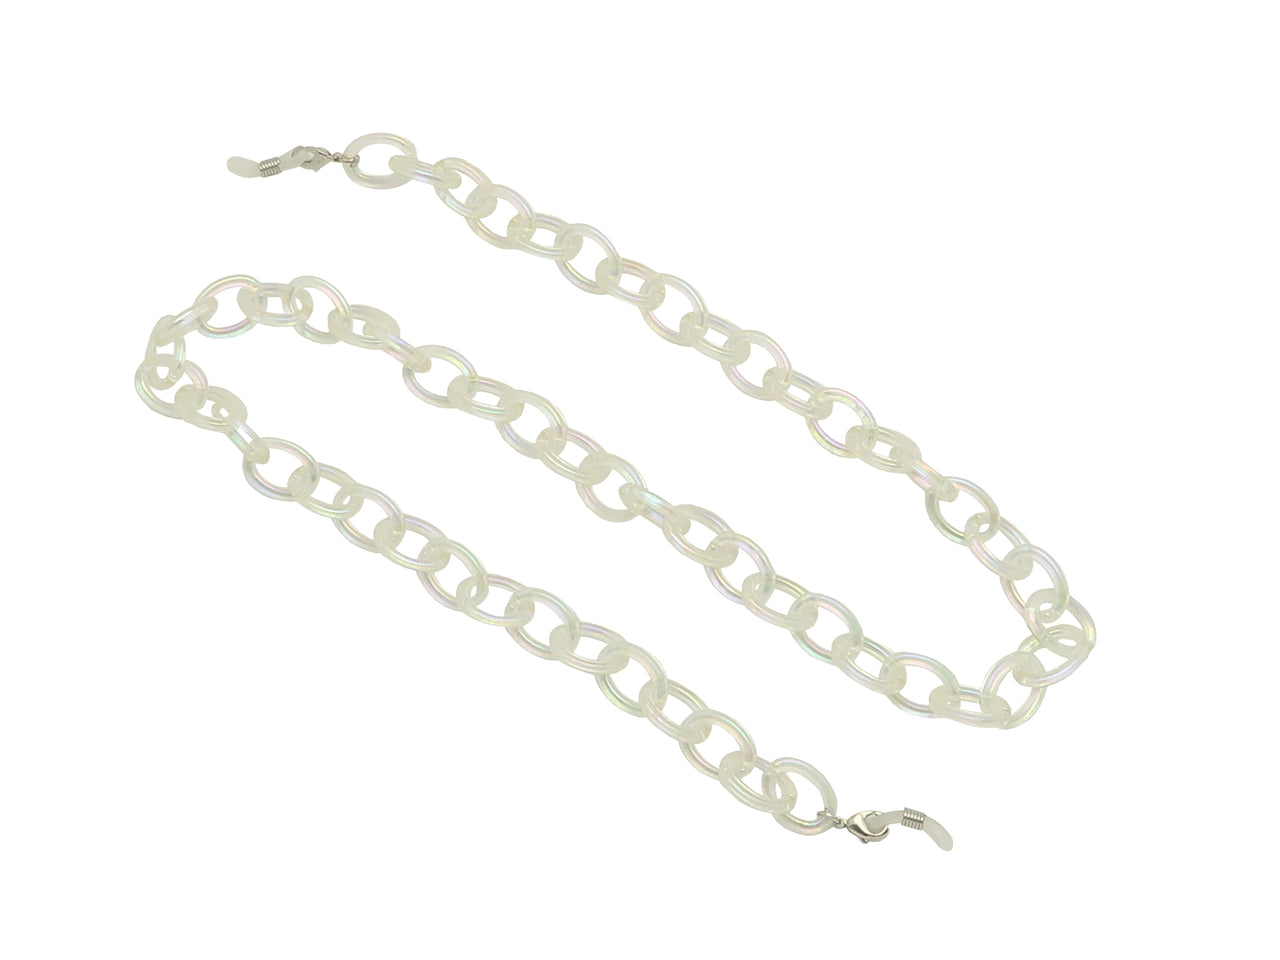 SC973CL - Wholesale Fashion Acrylic Clear Chain Retainer for Eyeglasses